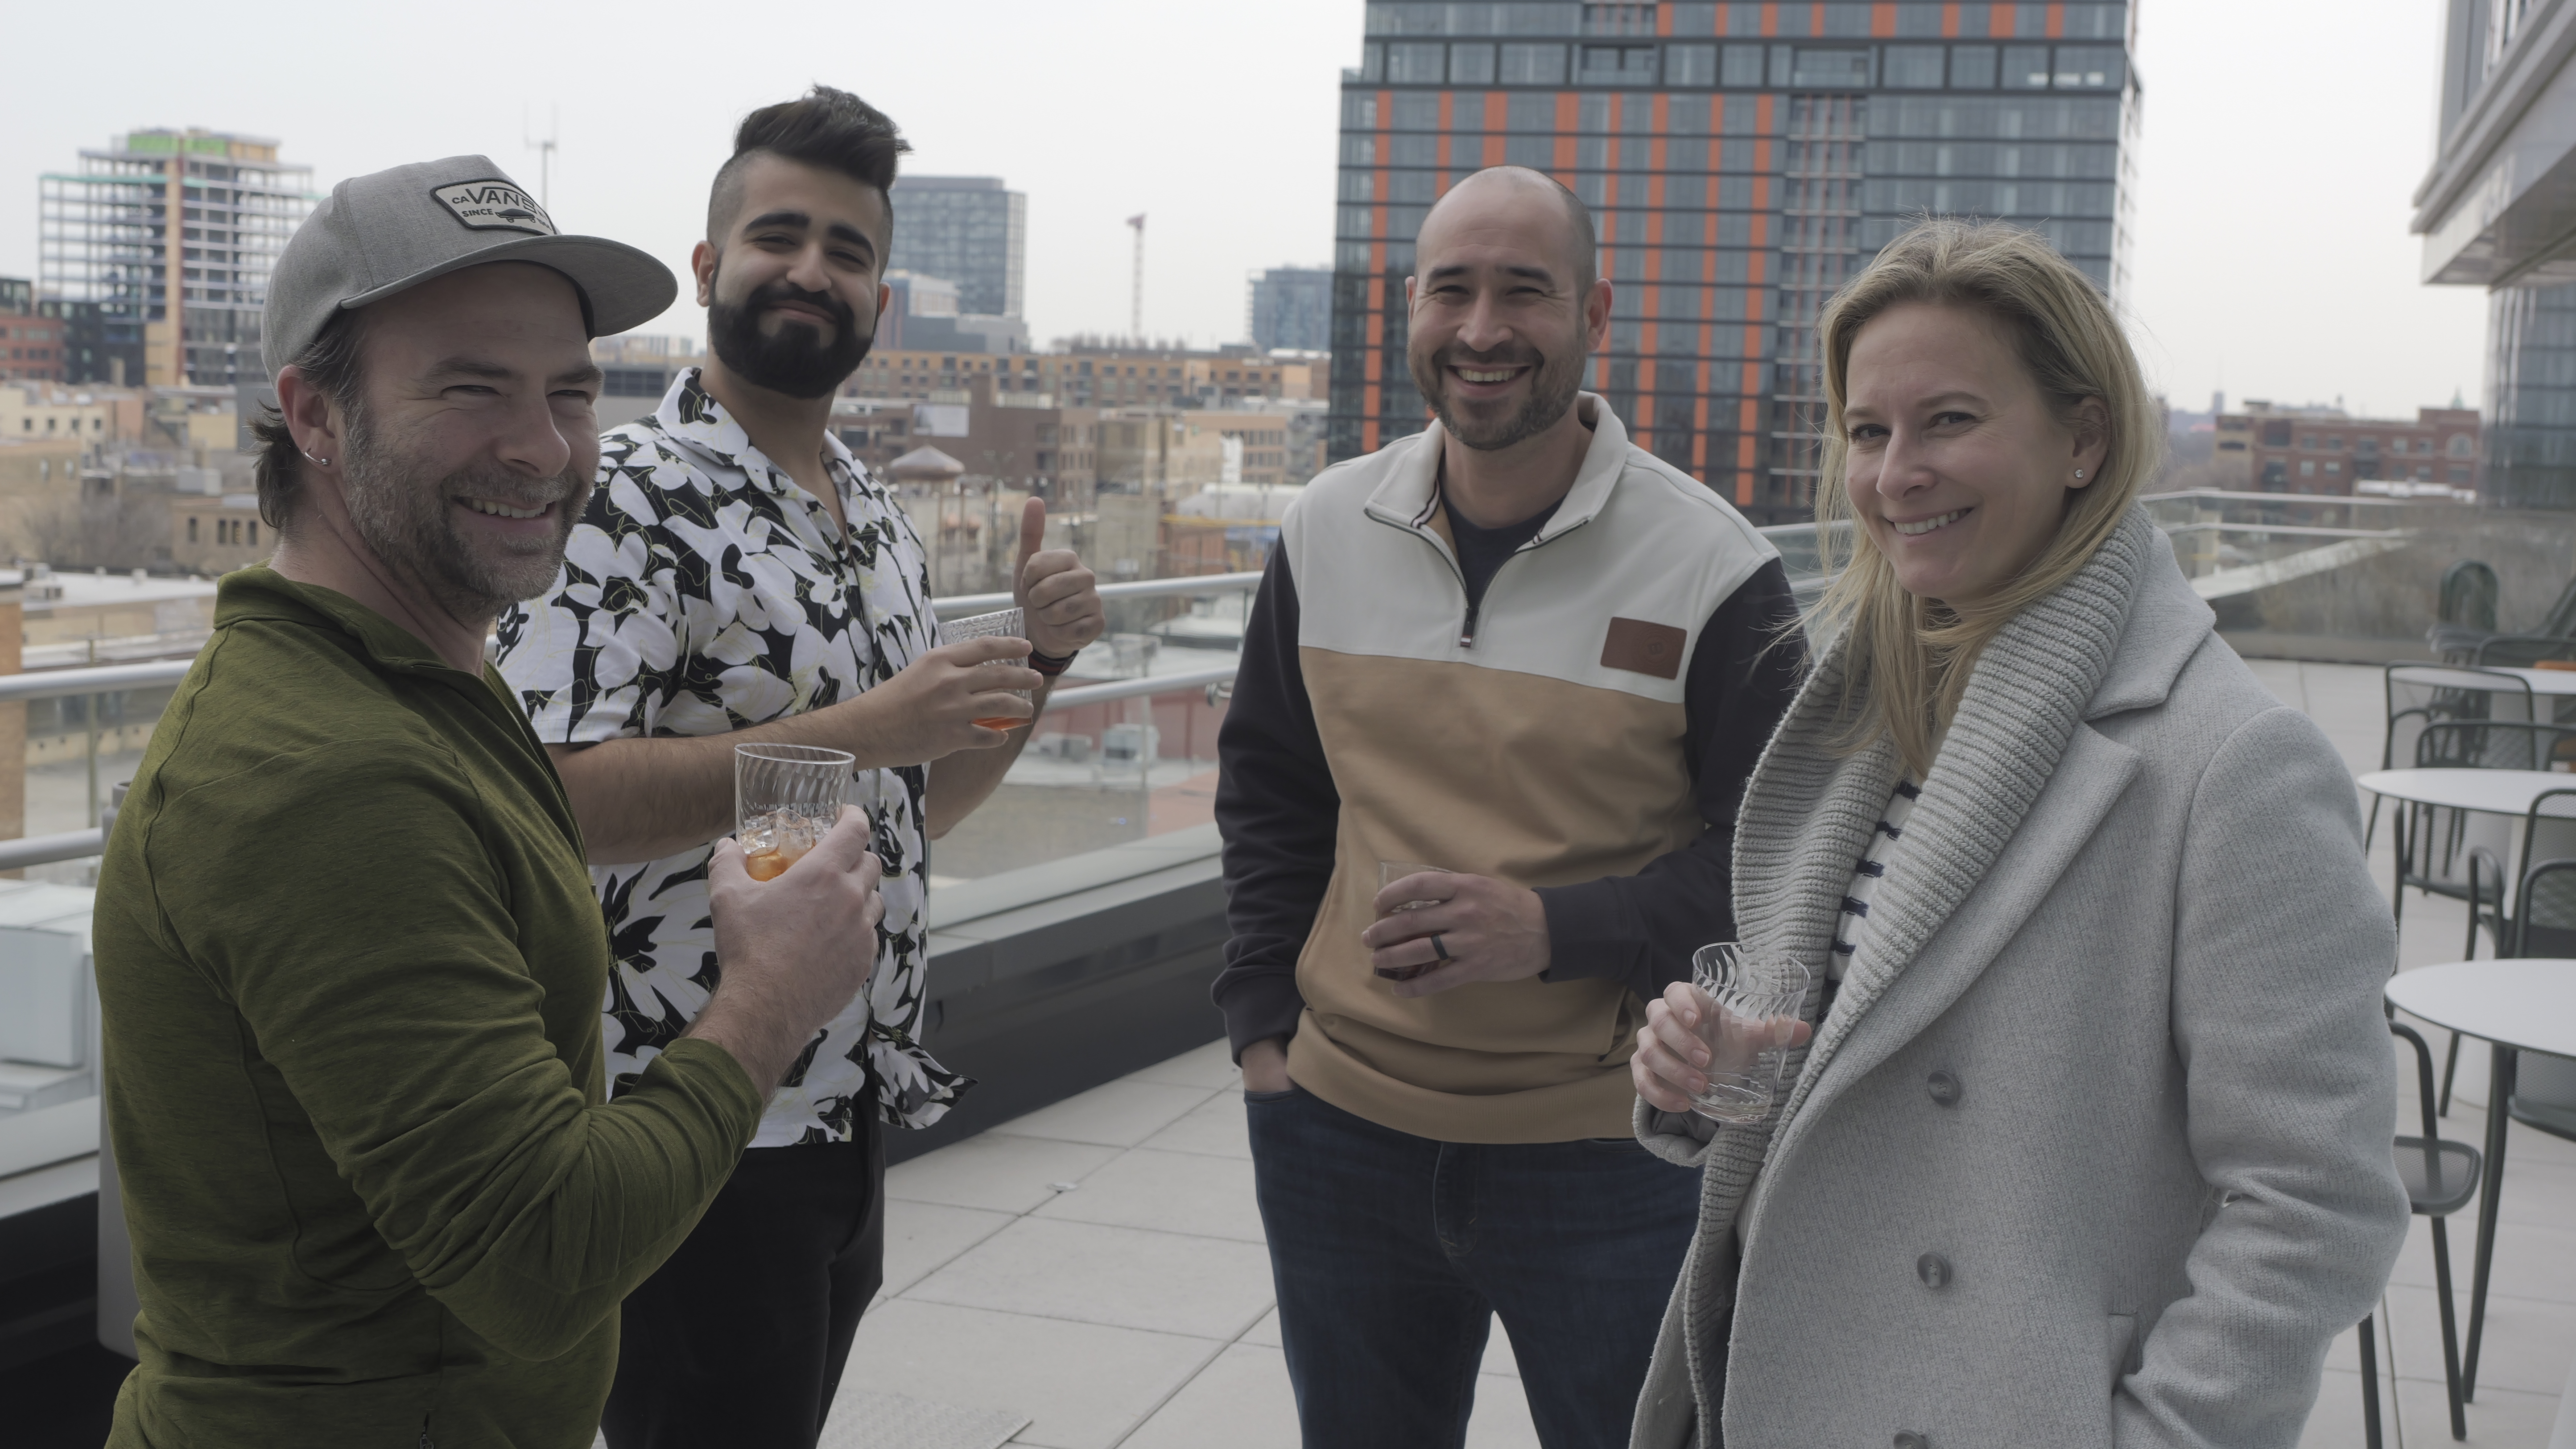 Four employees gathered on rooftop terrace, smiling